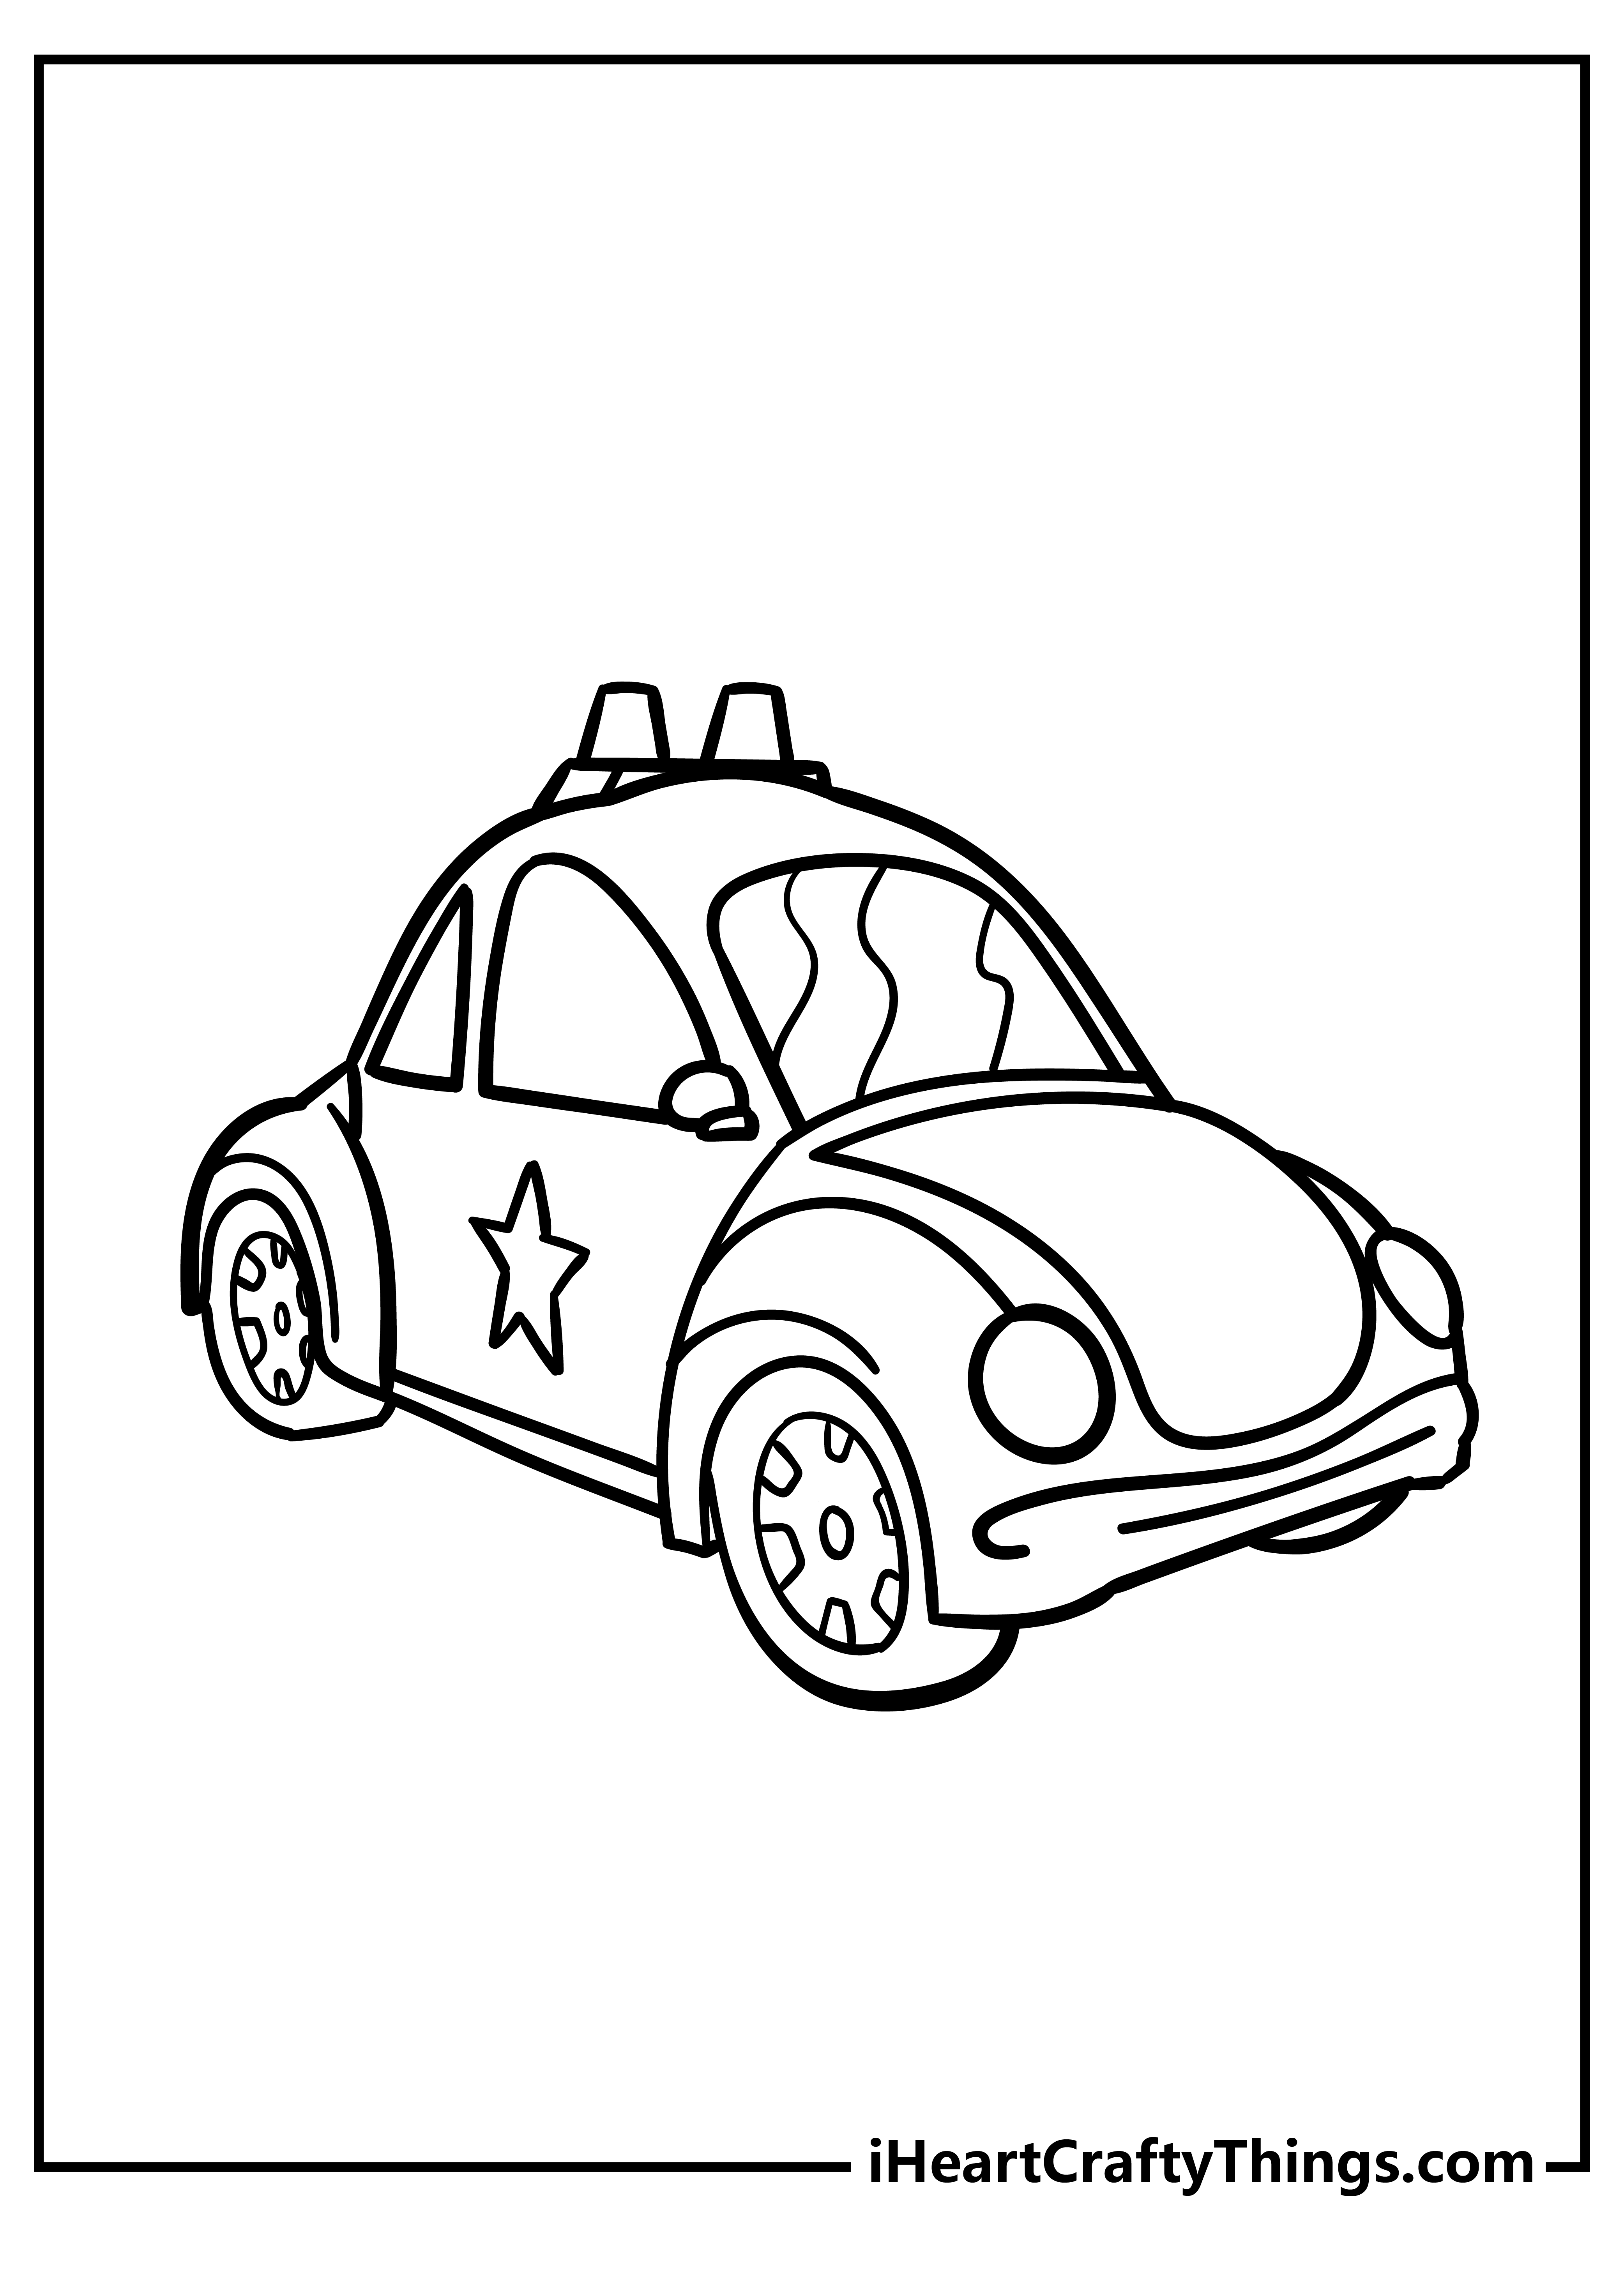 Police Car Coloring Pages for preschoolers free printable